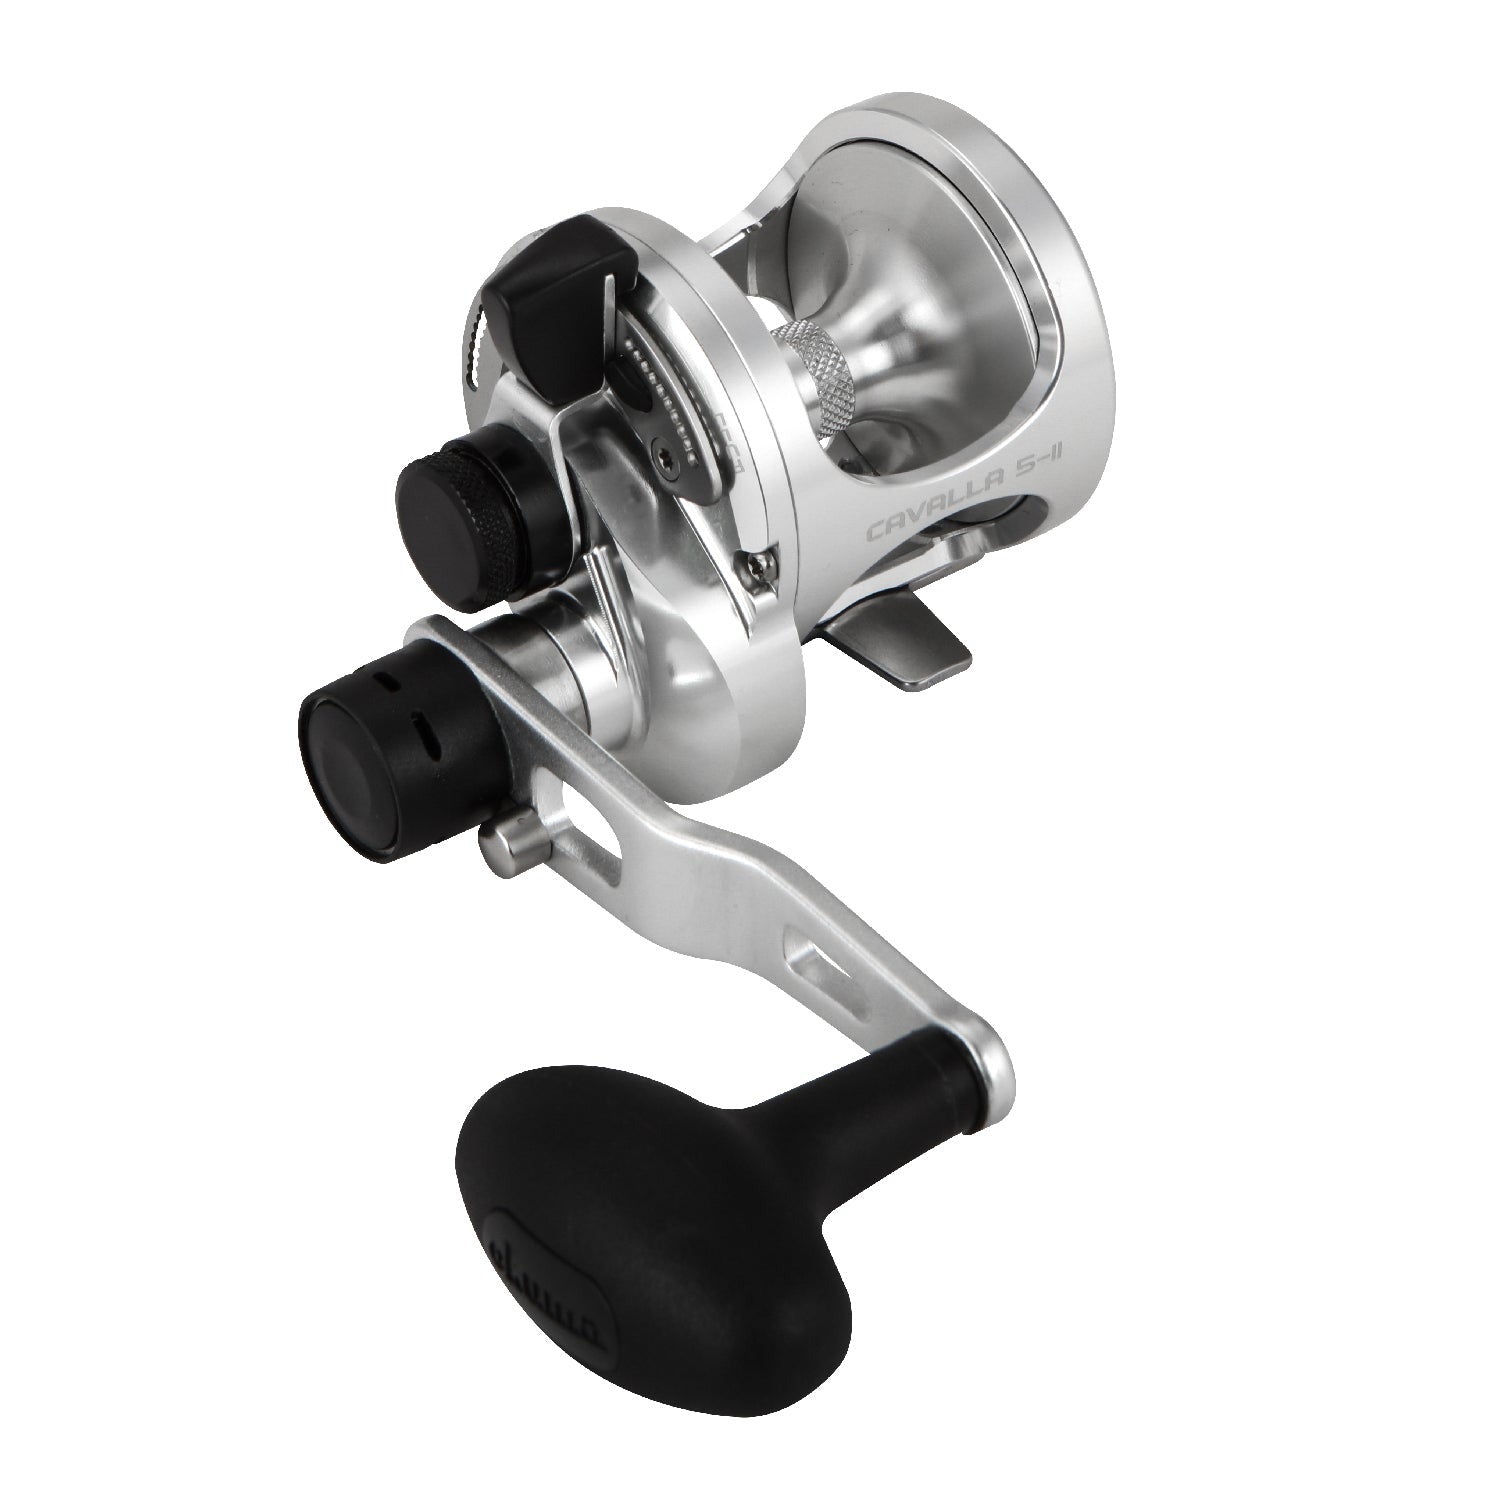 Reel in the big ones with our Okuma Makaira Lever Drag Reels